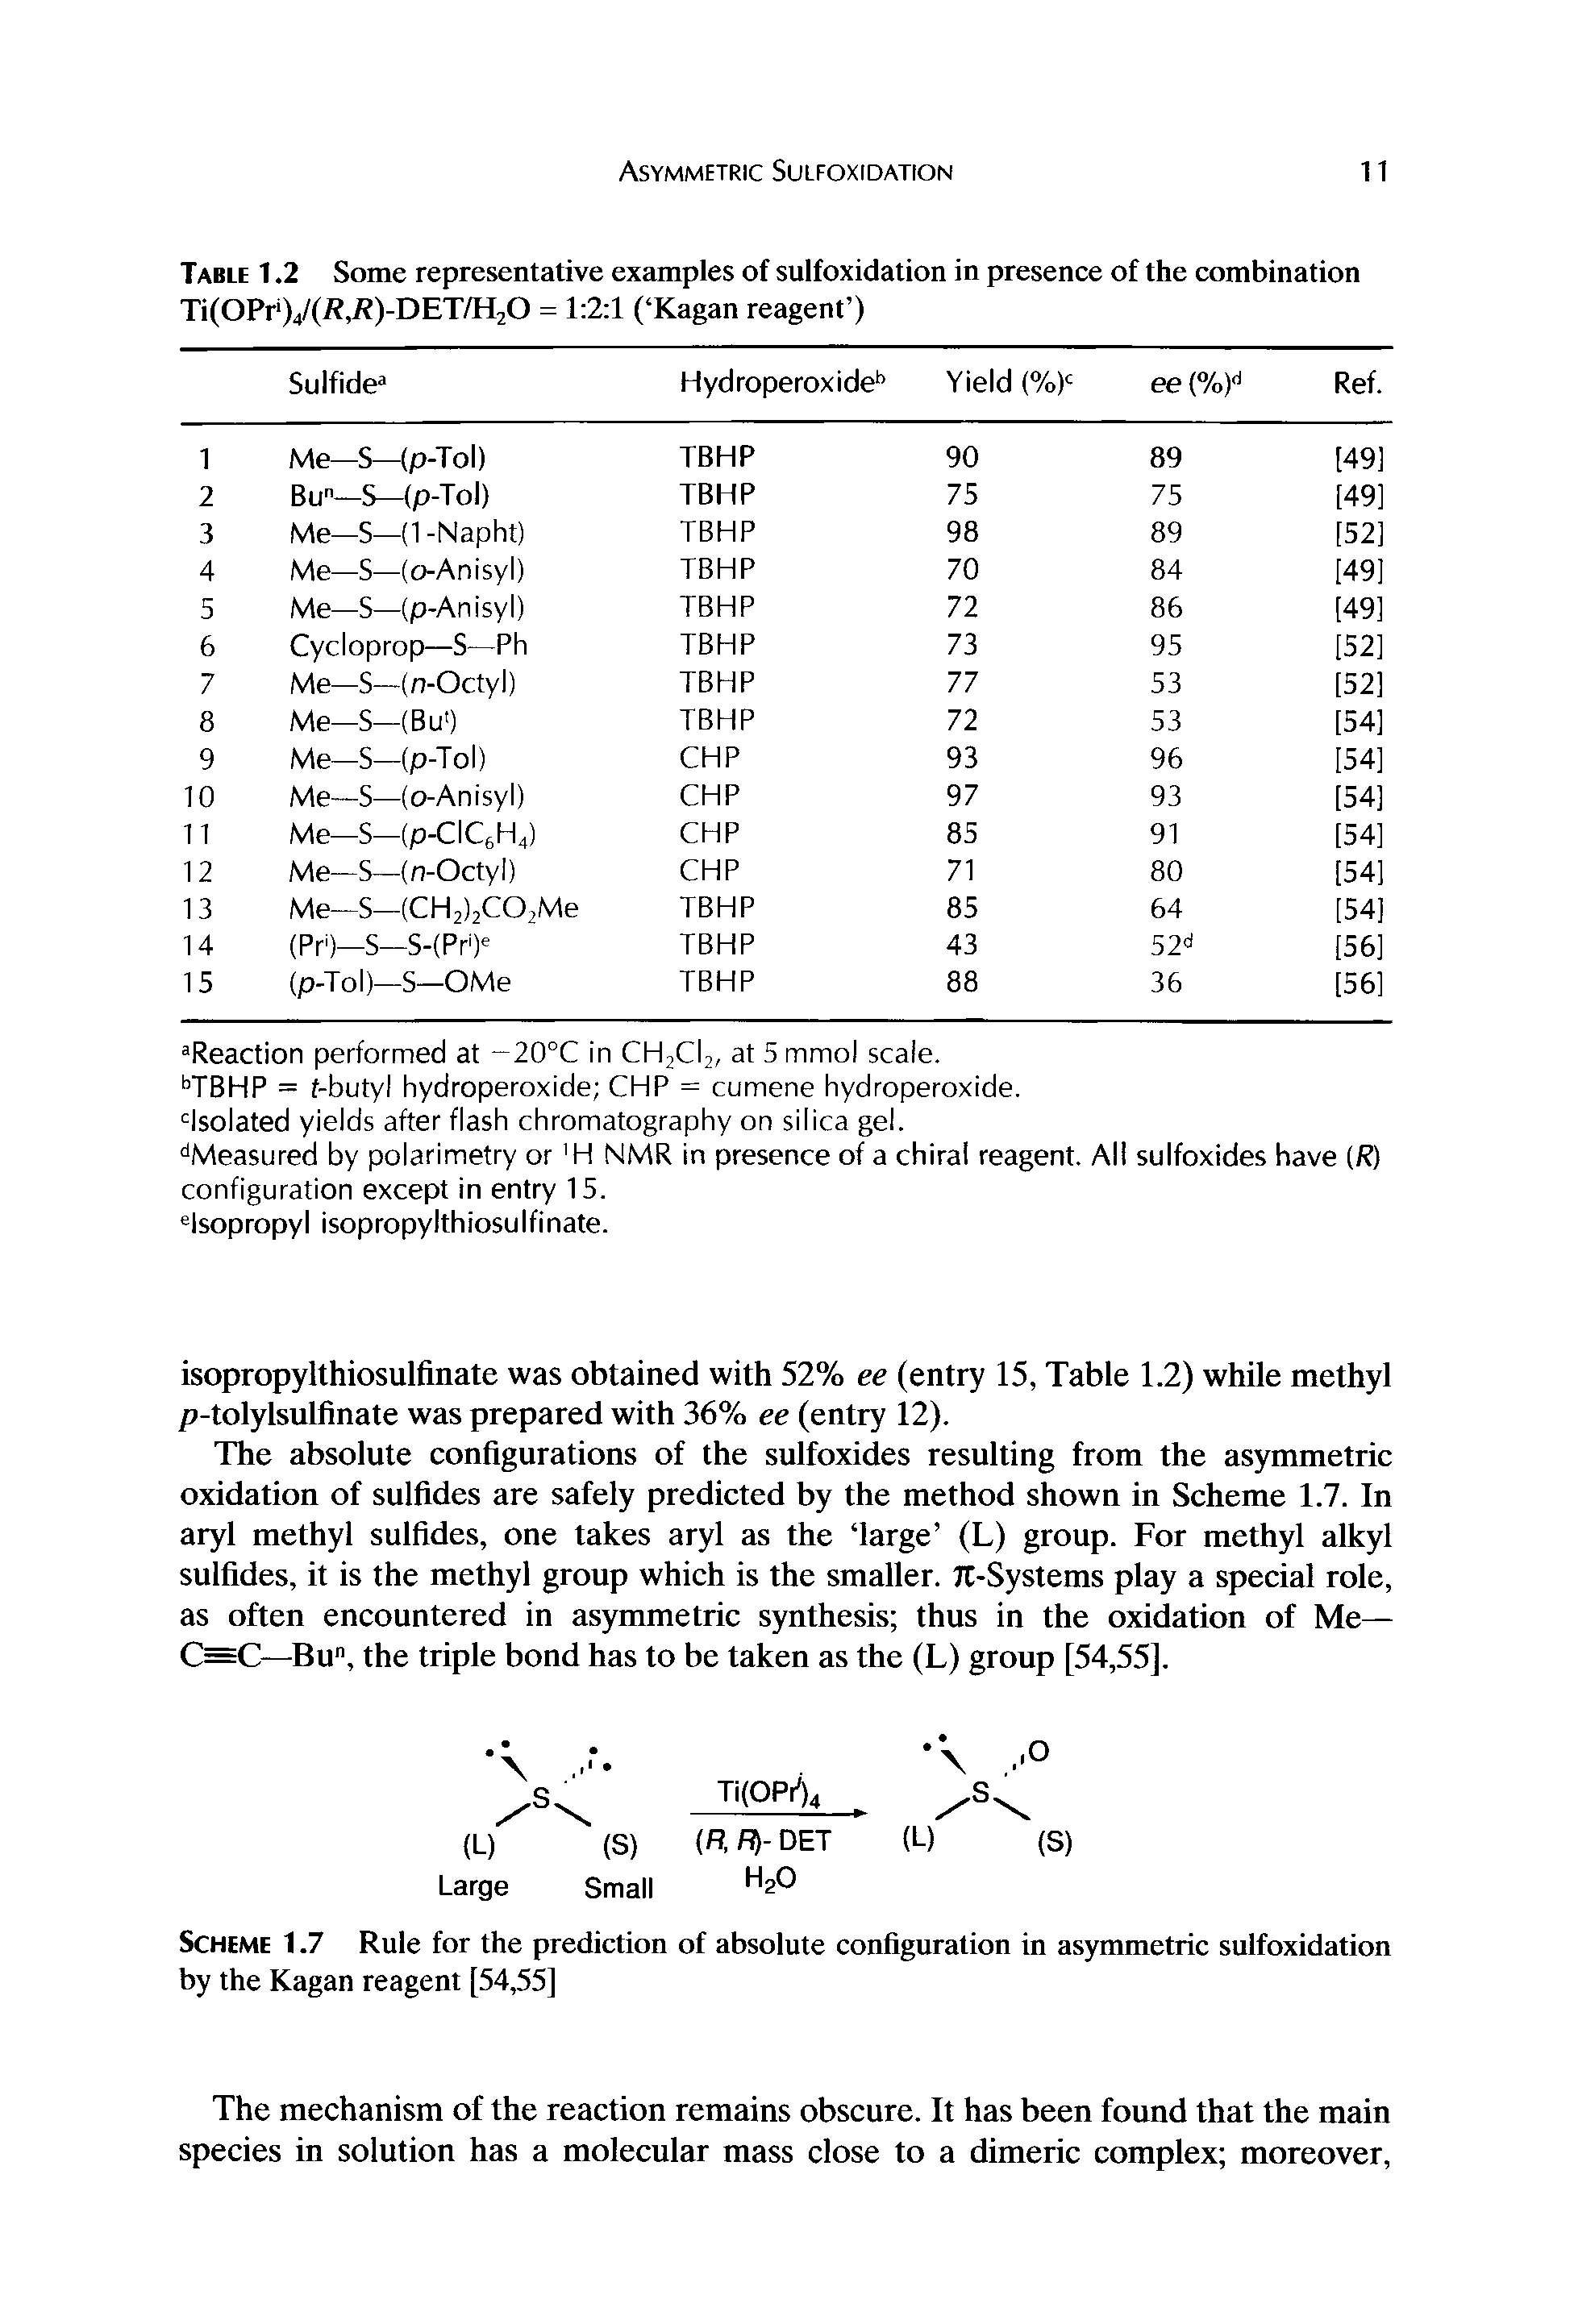 Scheme 1.7 Rule for the prediction of absolute configuration in asymmetric sulfoxidation by the Kagan reagent [54,55]...